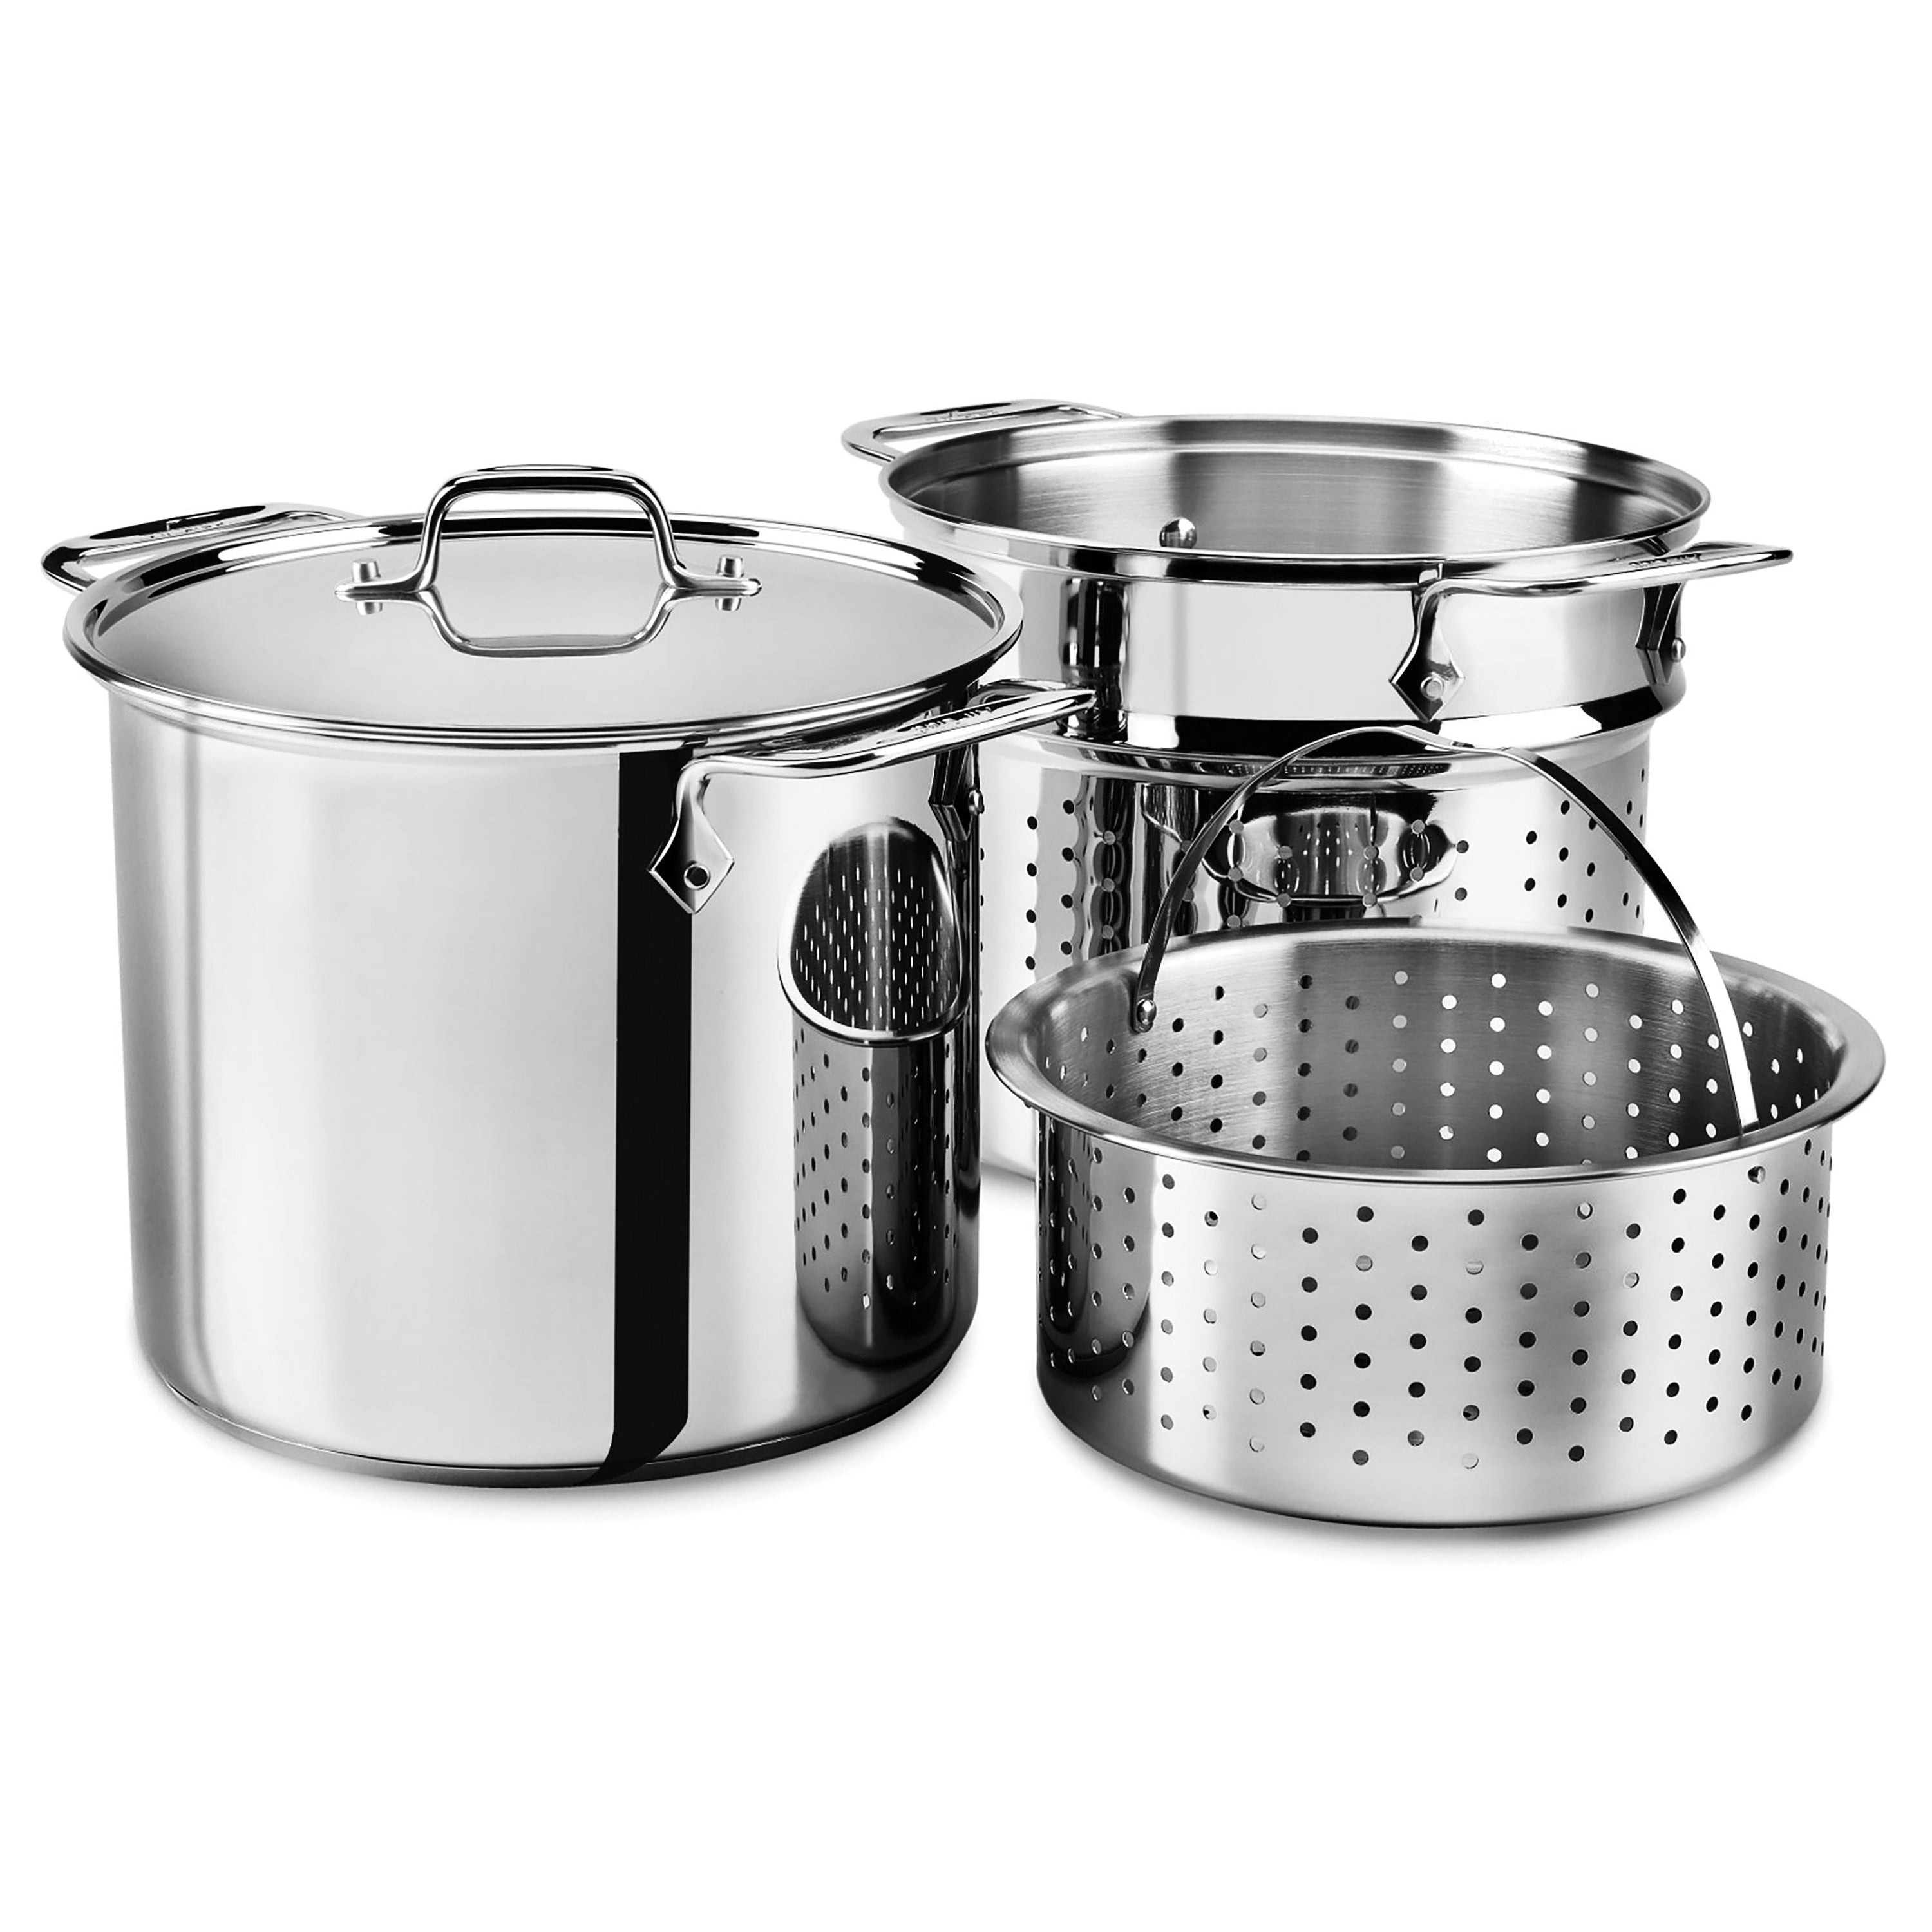  All-Clad Specialty Stainless Steel Pressure Cooker with Steaming  Basket 8.4 Quart Oven Broiler Safe 600F Pots and Pans, Cookware Silver:  Home & Kitchen